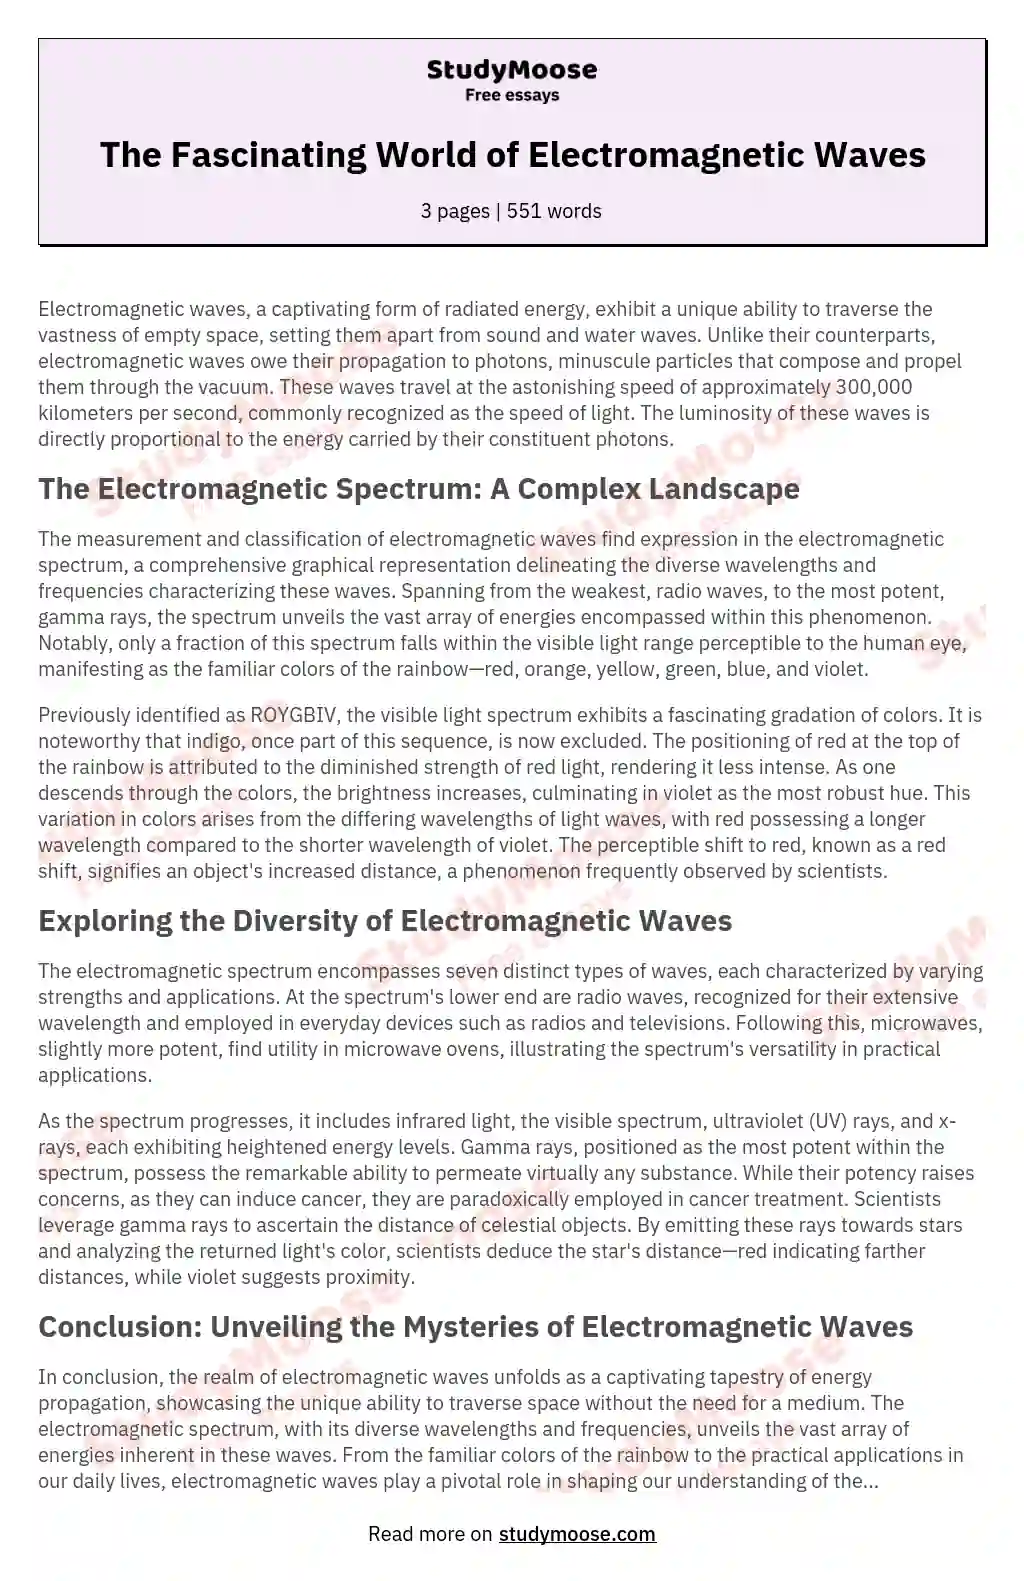 The Fascinating World of Electromagnetic Waves essay